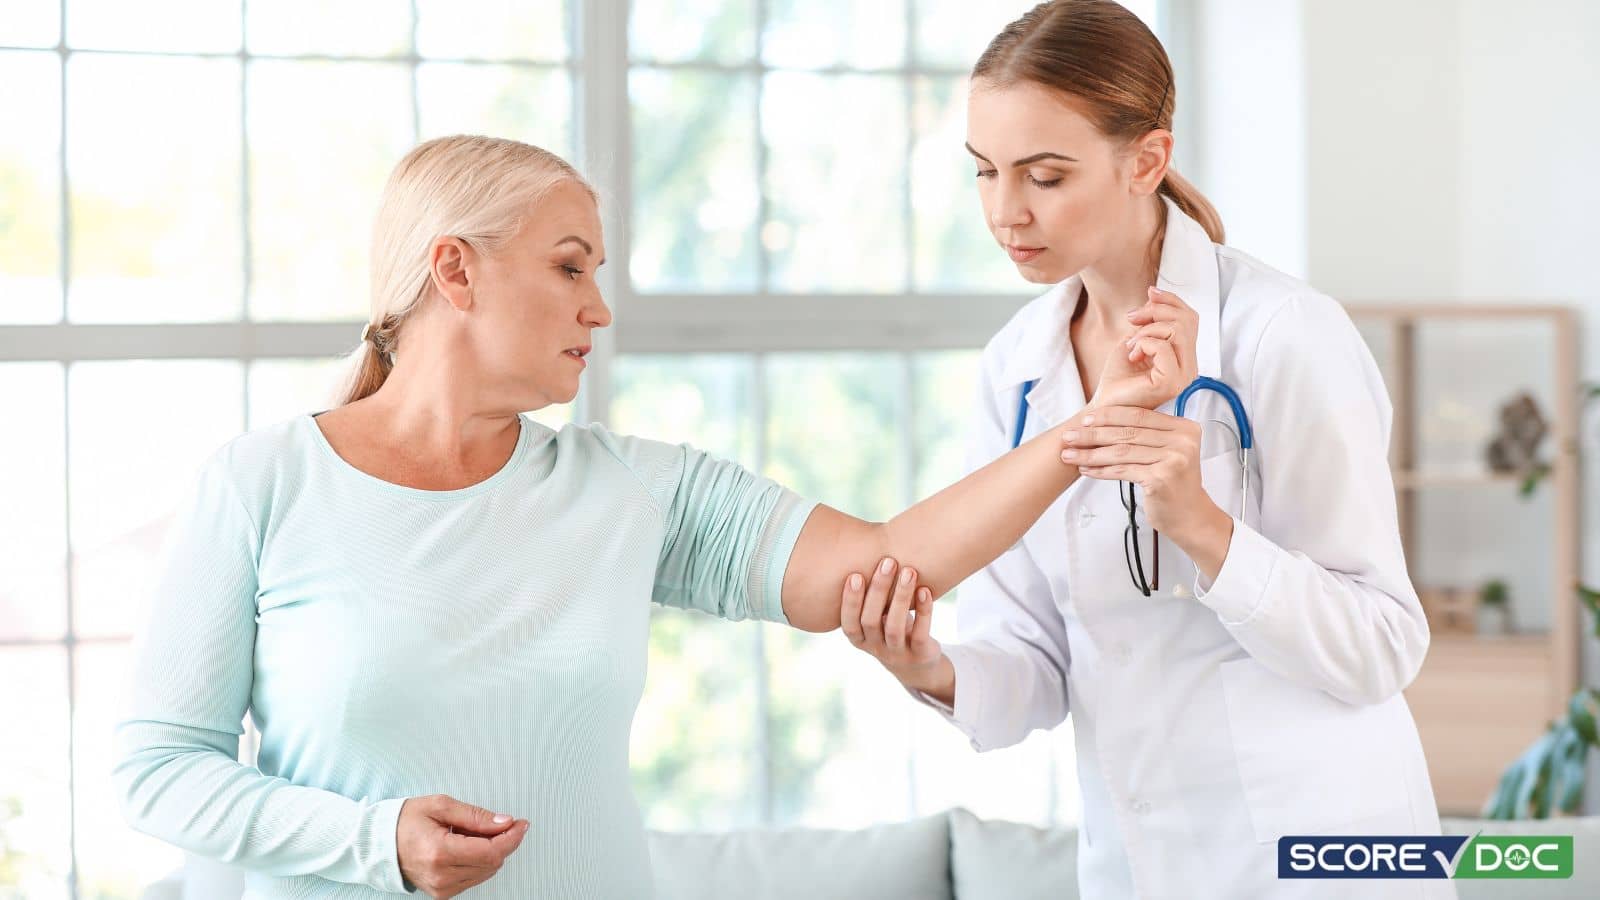 Top-Rated Pain Management Centers in and around Baltimore, MD